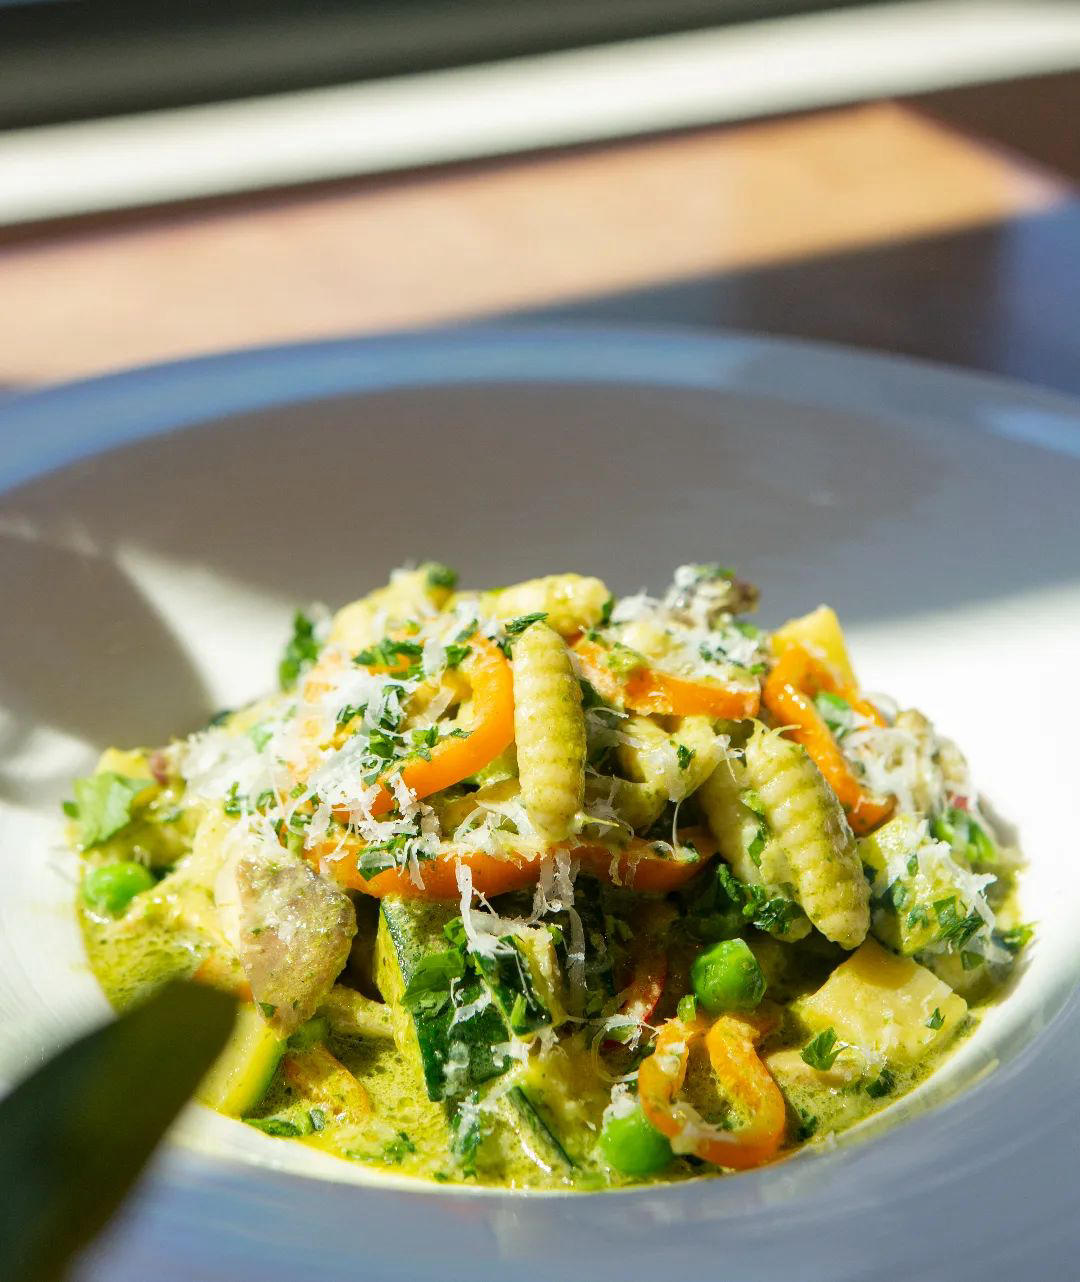 GiadaVegas - Stop in for brunch this weekend to try our homemade cavatelli with pesto, zucchini, pea